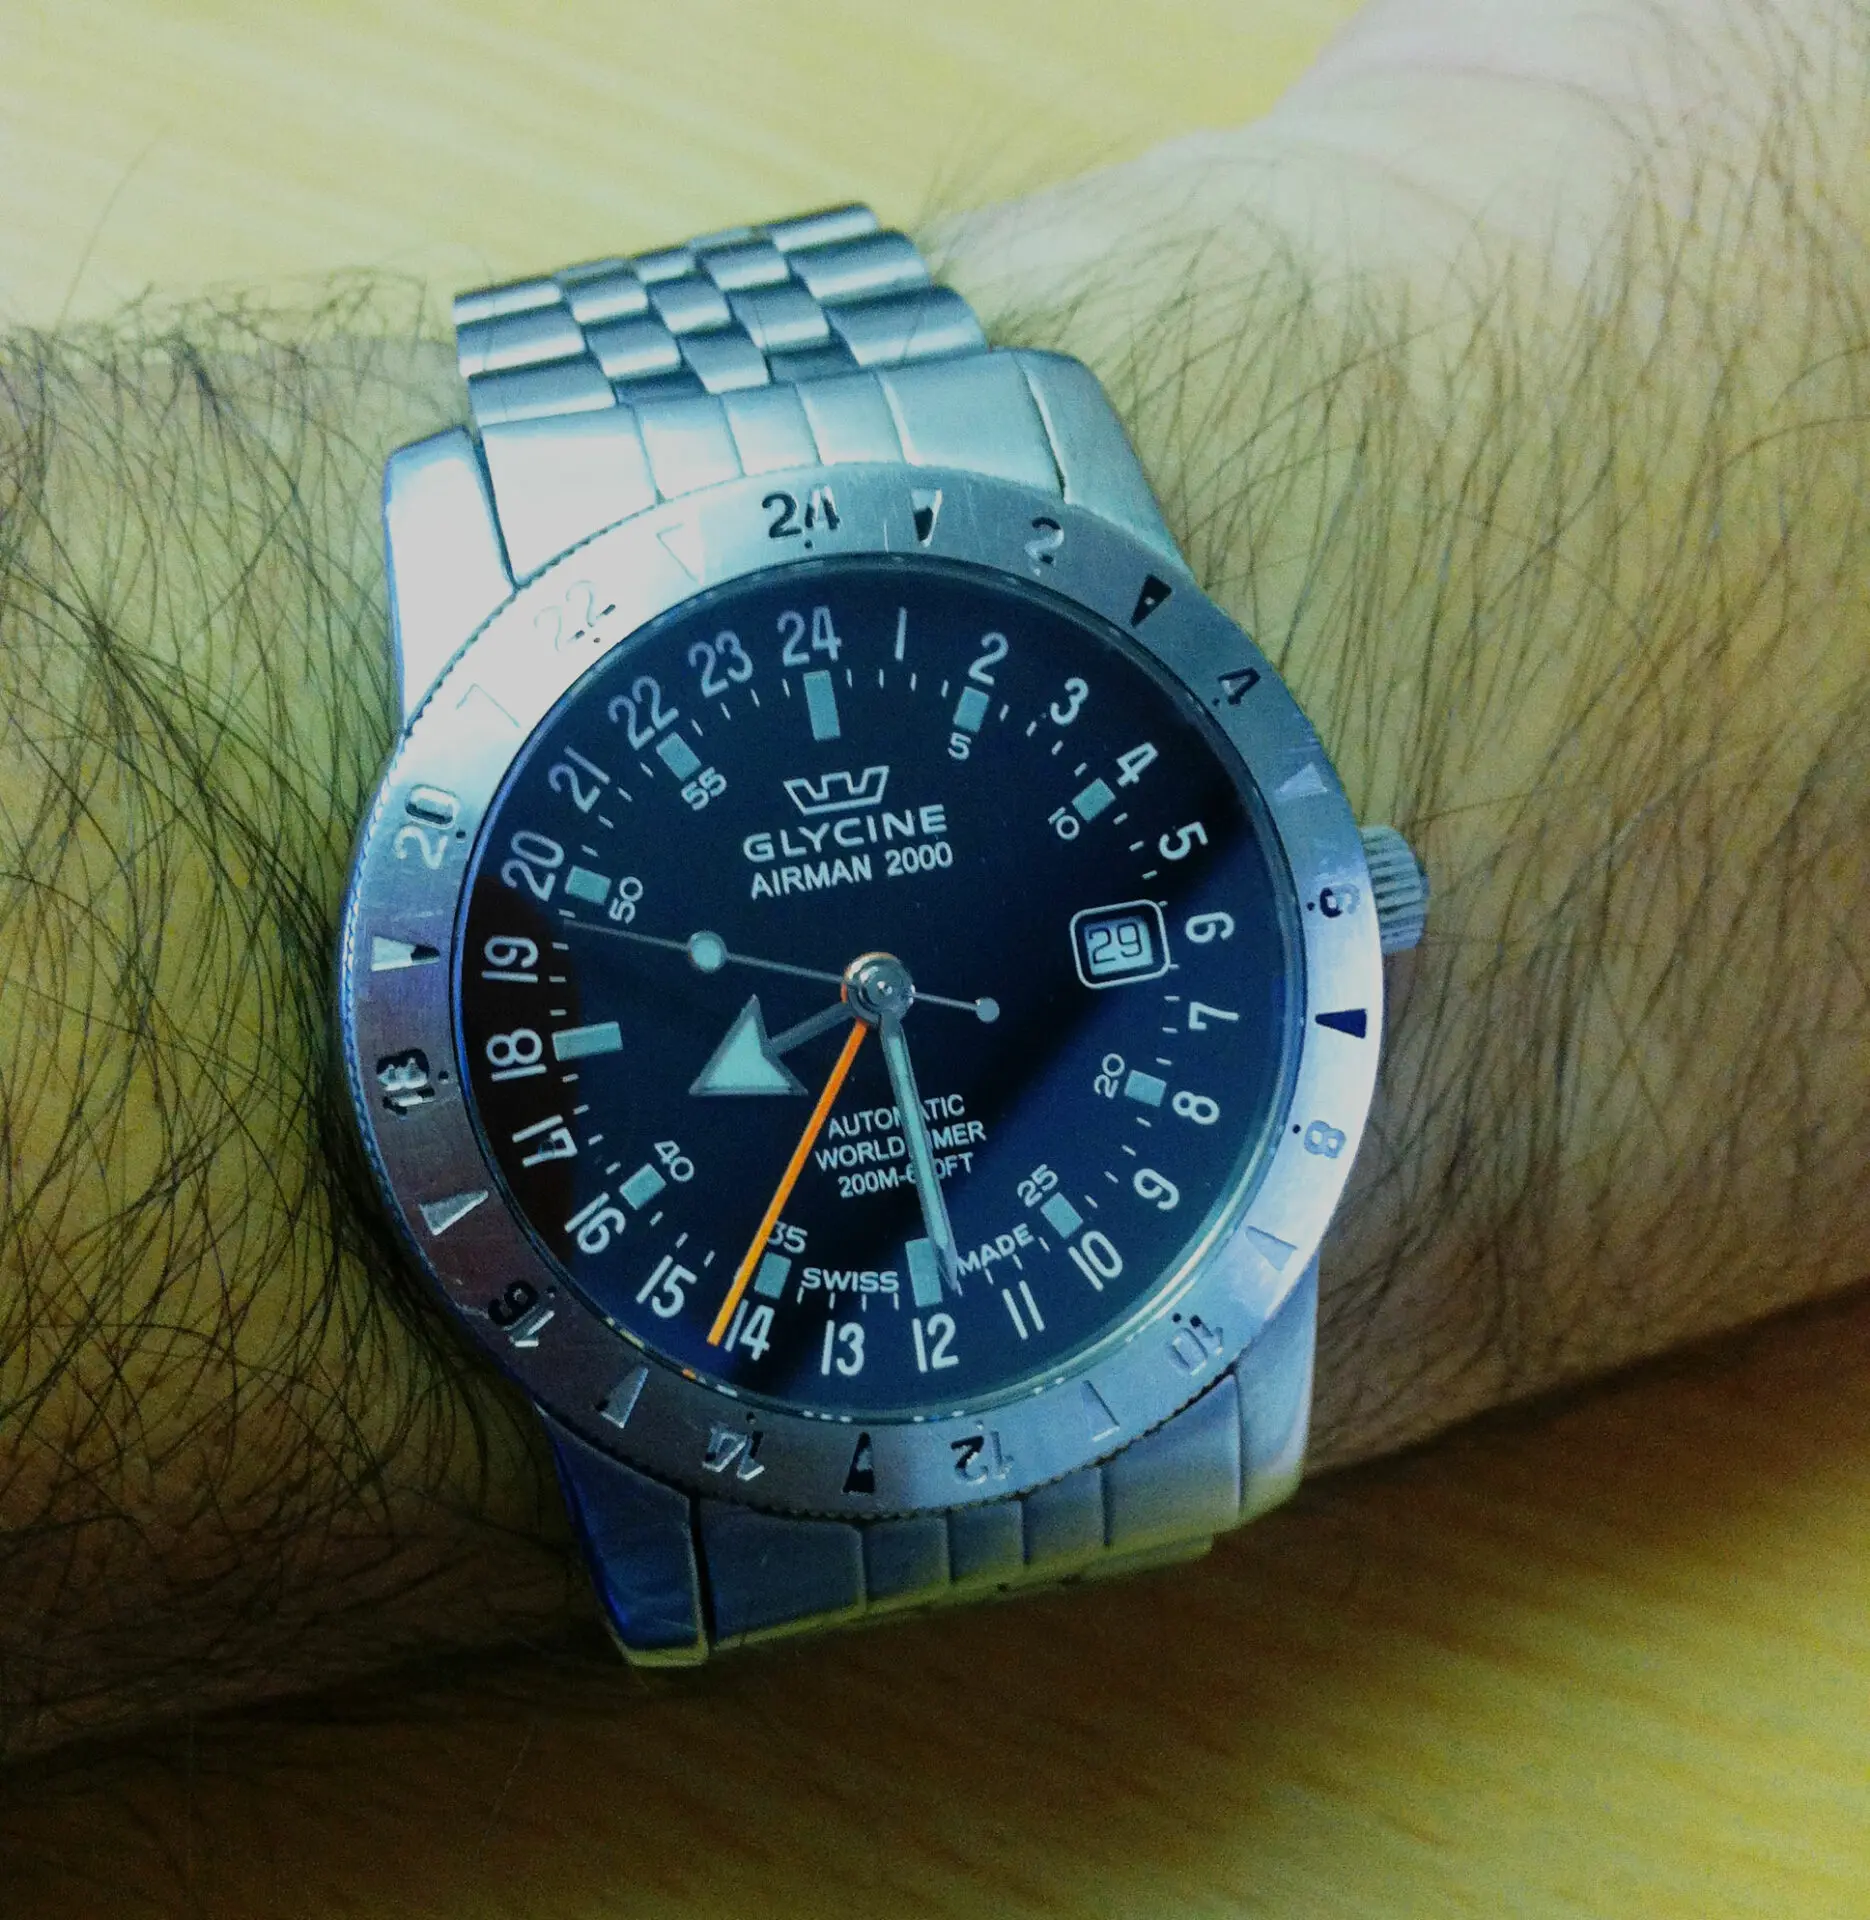 BOTH WATCHES SOLD-Glycine Airman Automatic And Quartz, 58% OFF